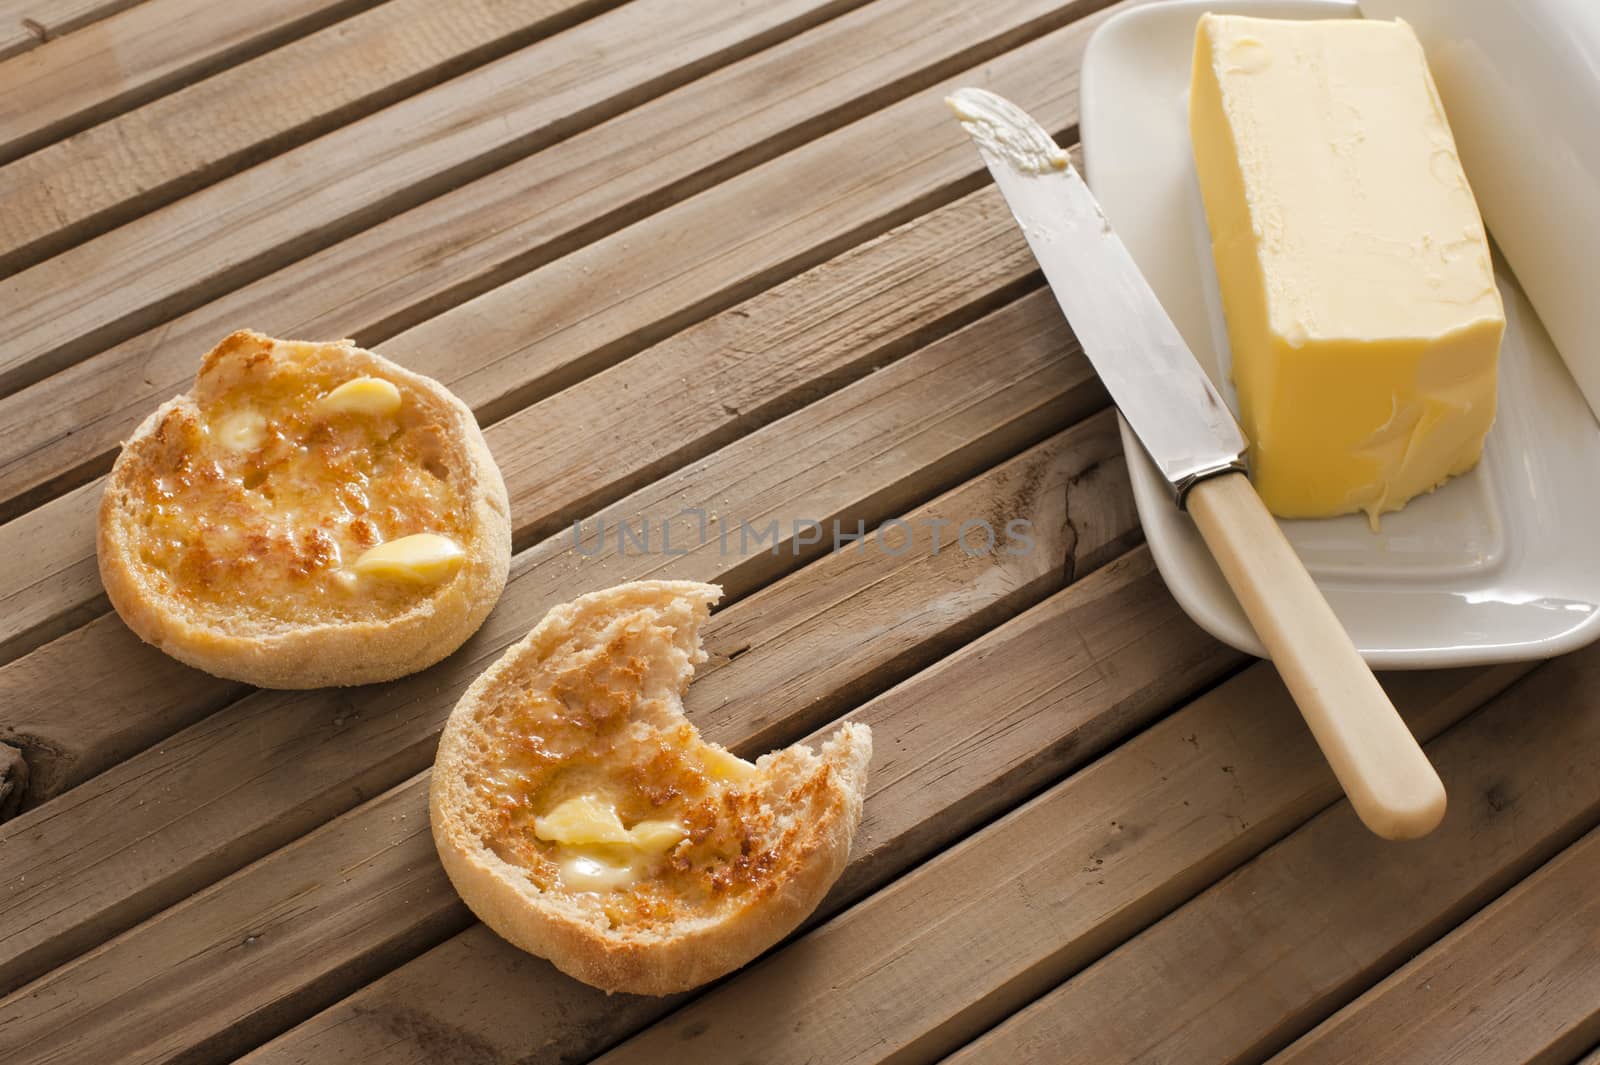 Buttered crumpets for breakfast with a pat of butter alongside on a plate served on a wooden table, one crumpet bitten into